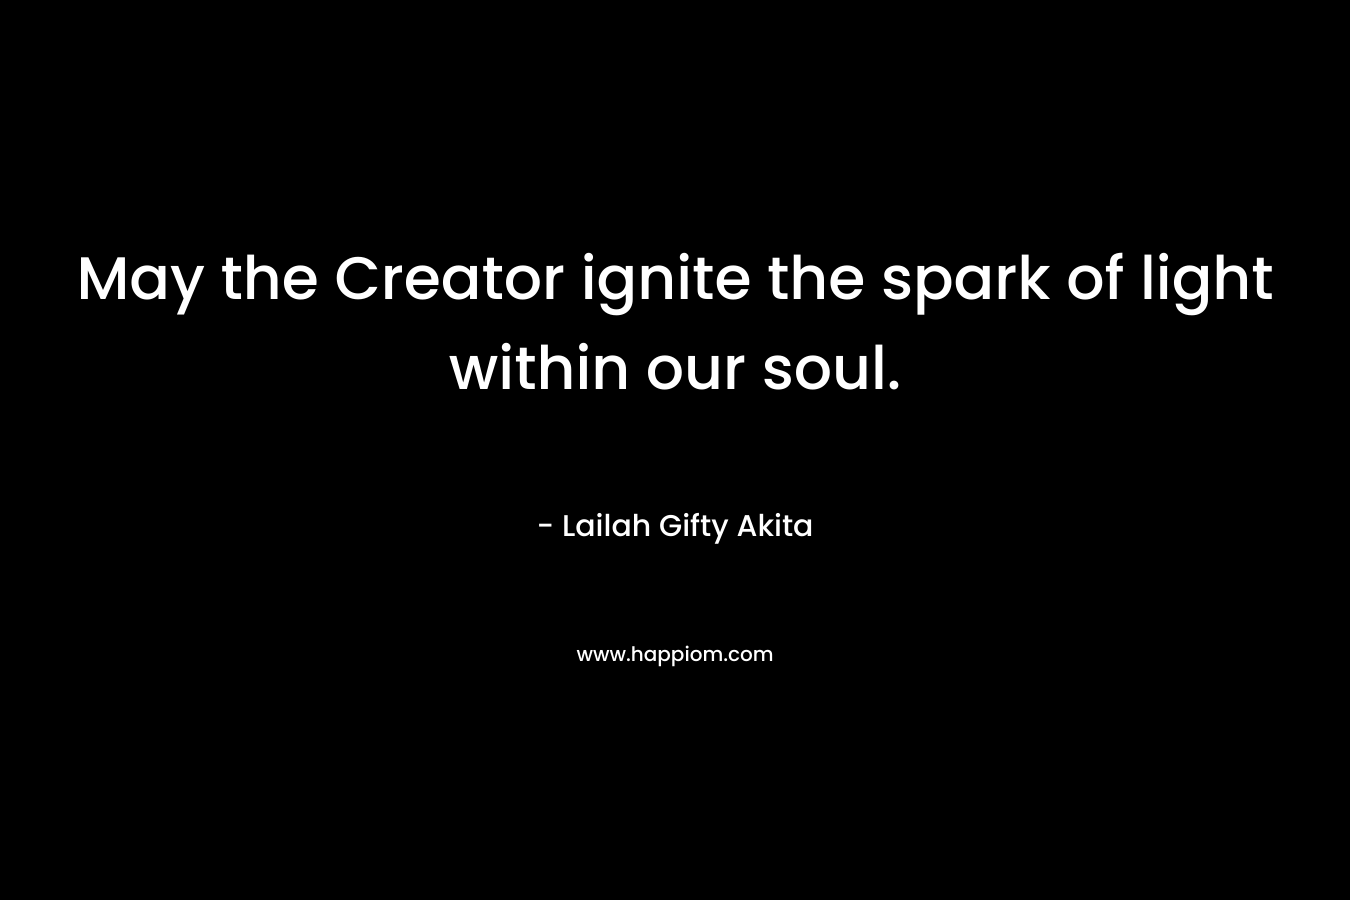 May the Creator ignite the spark of light within our soul.